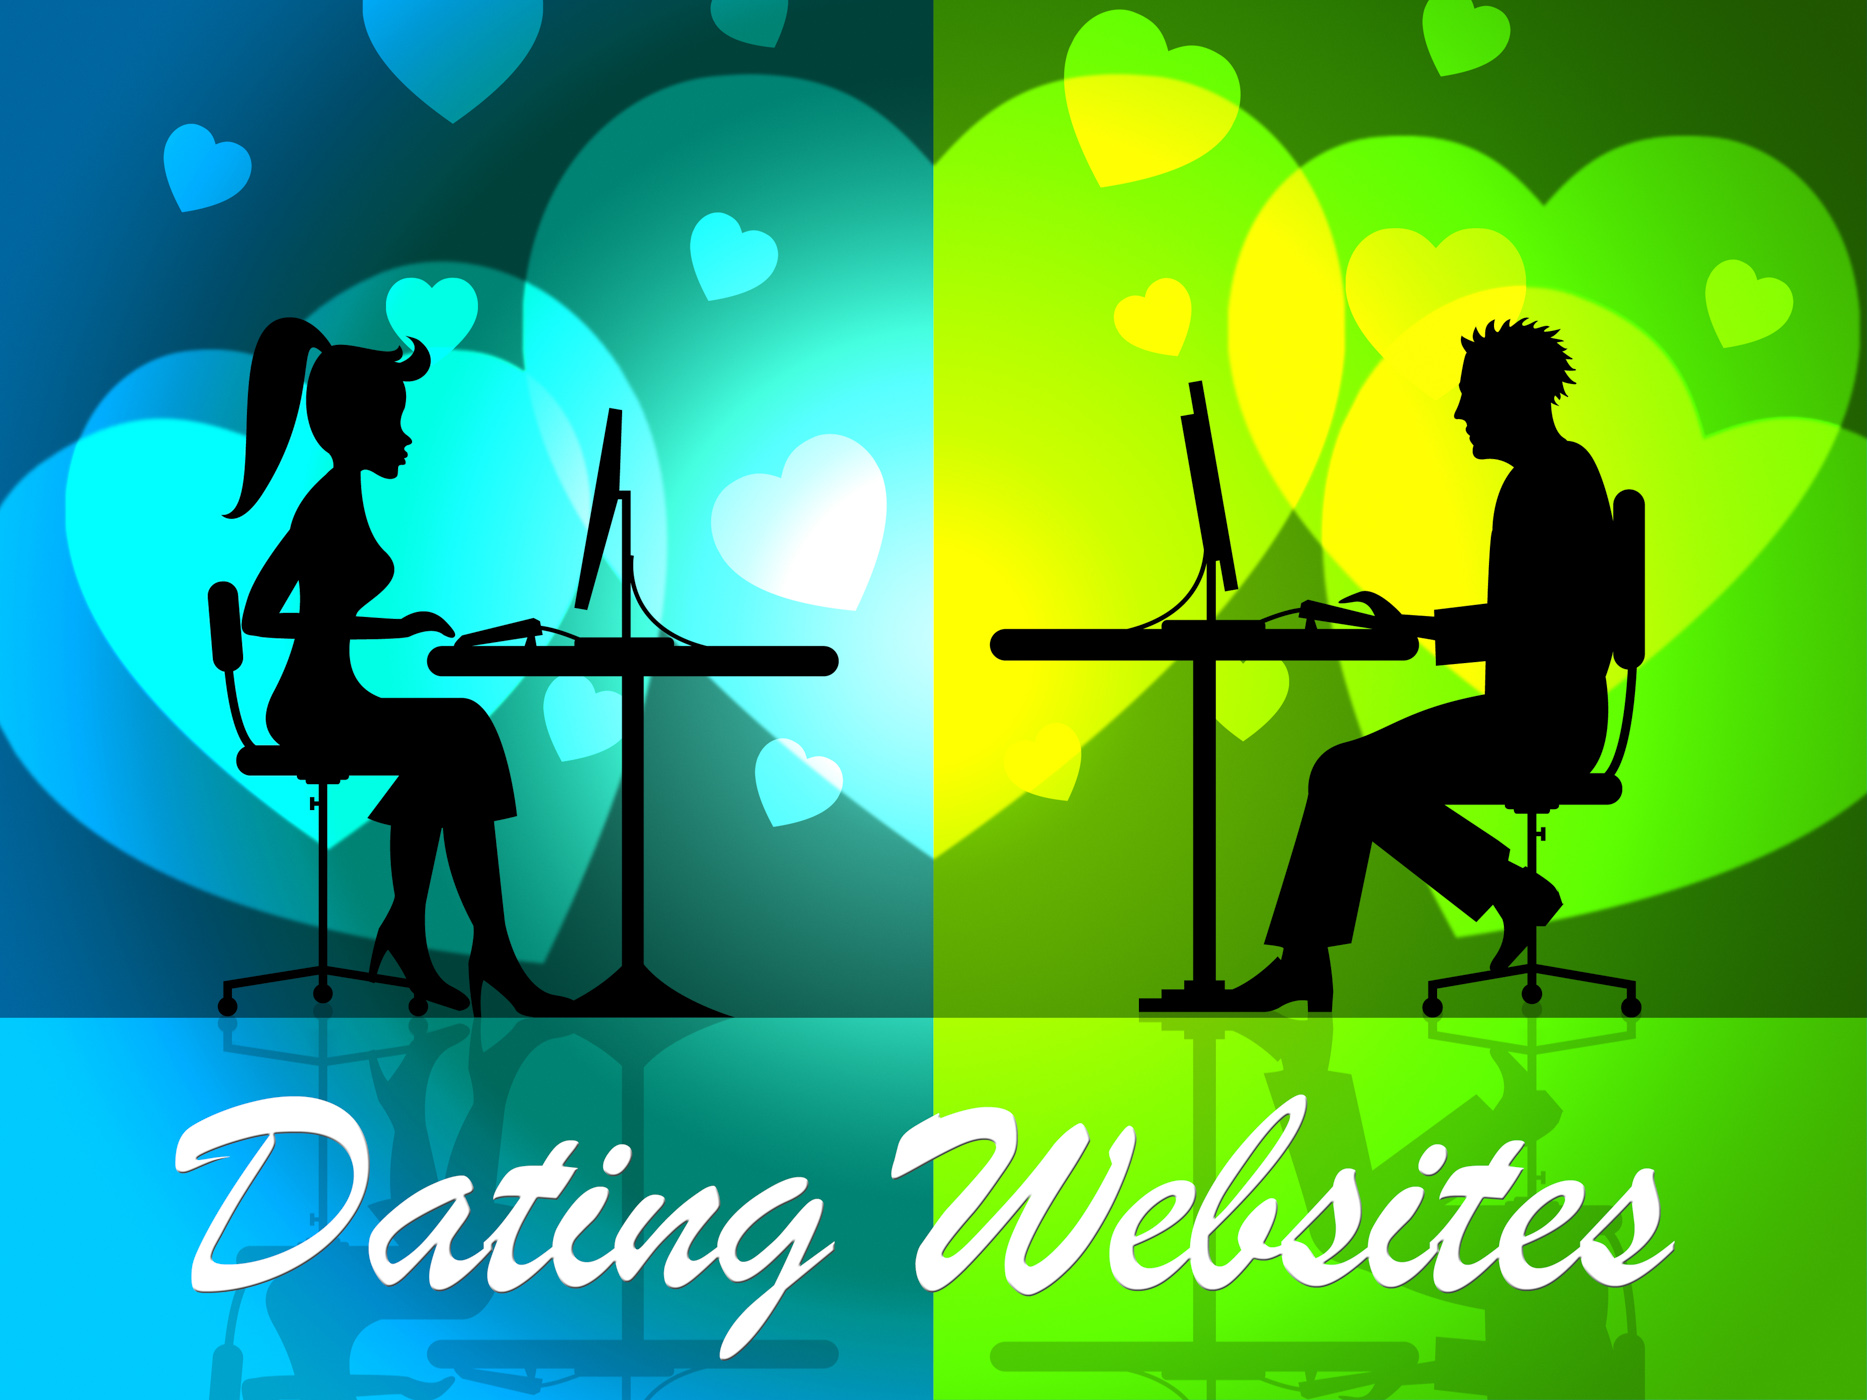 Dating websites means dates network and date photo